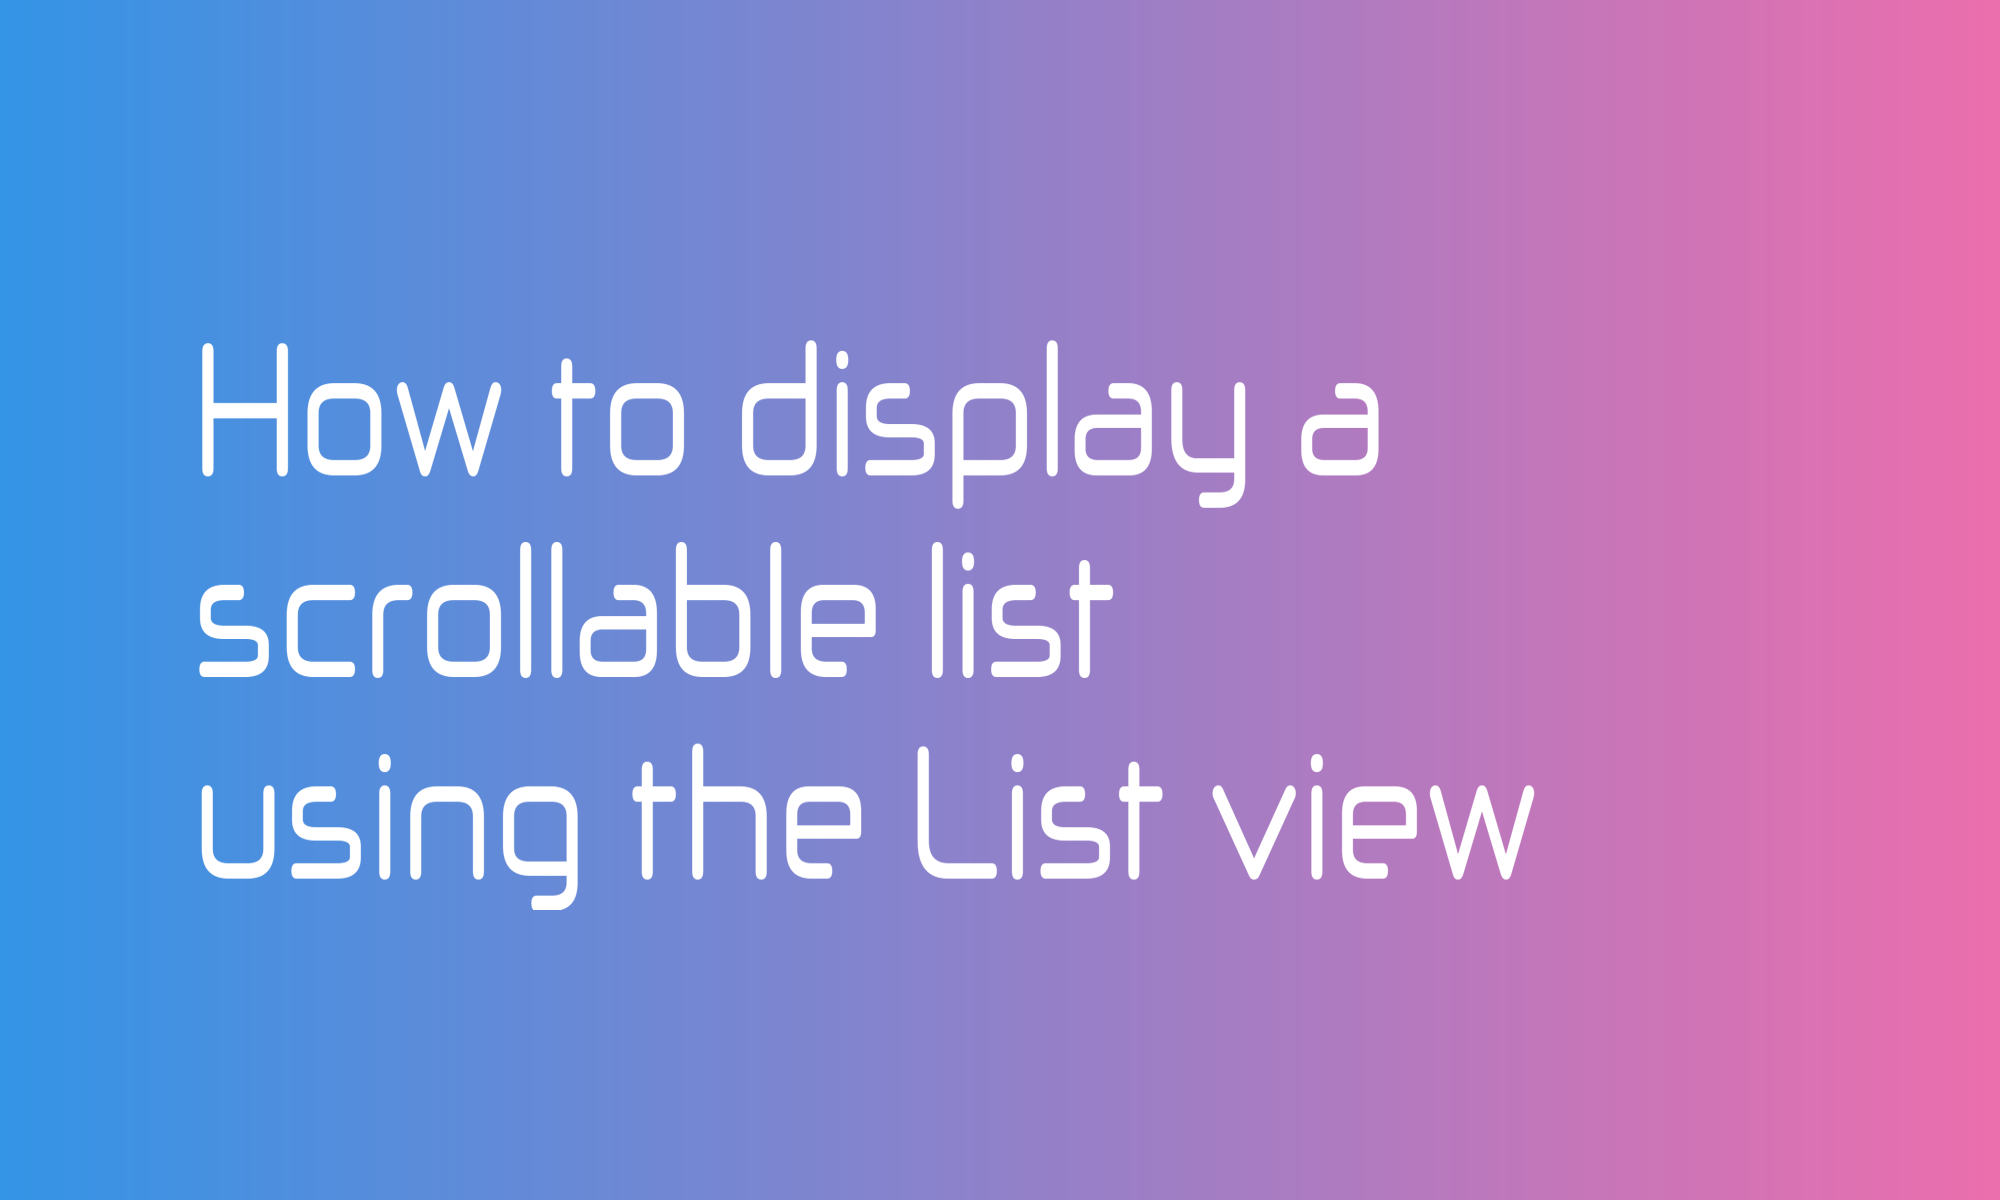 How to display a scrollable list using the List view